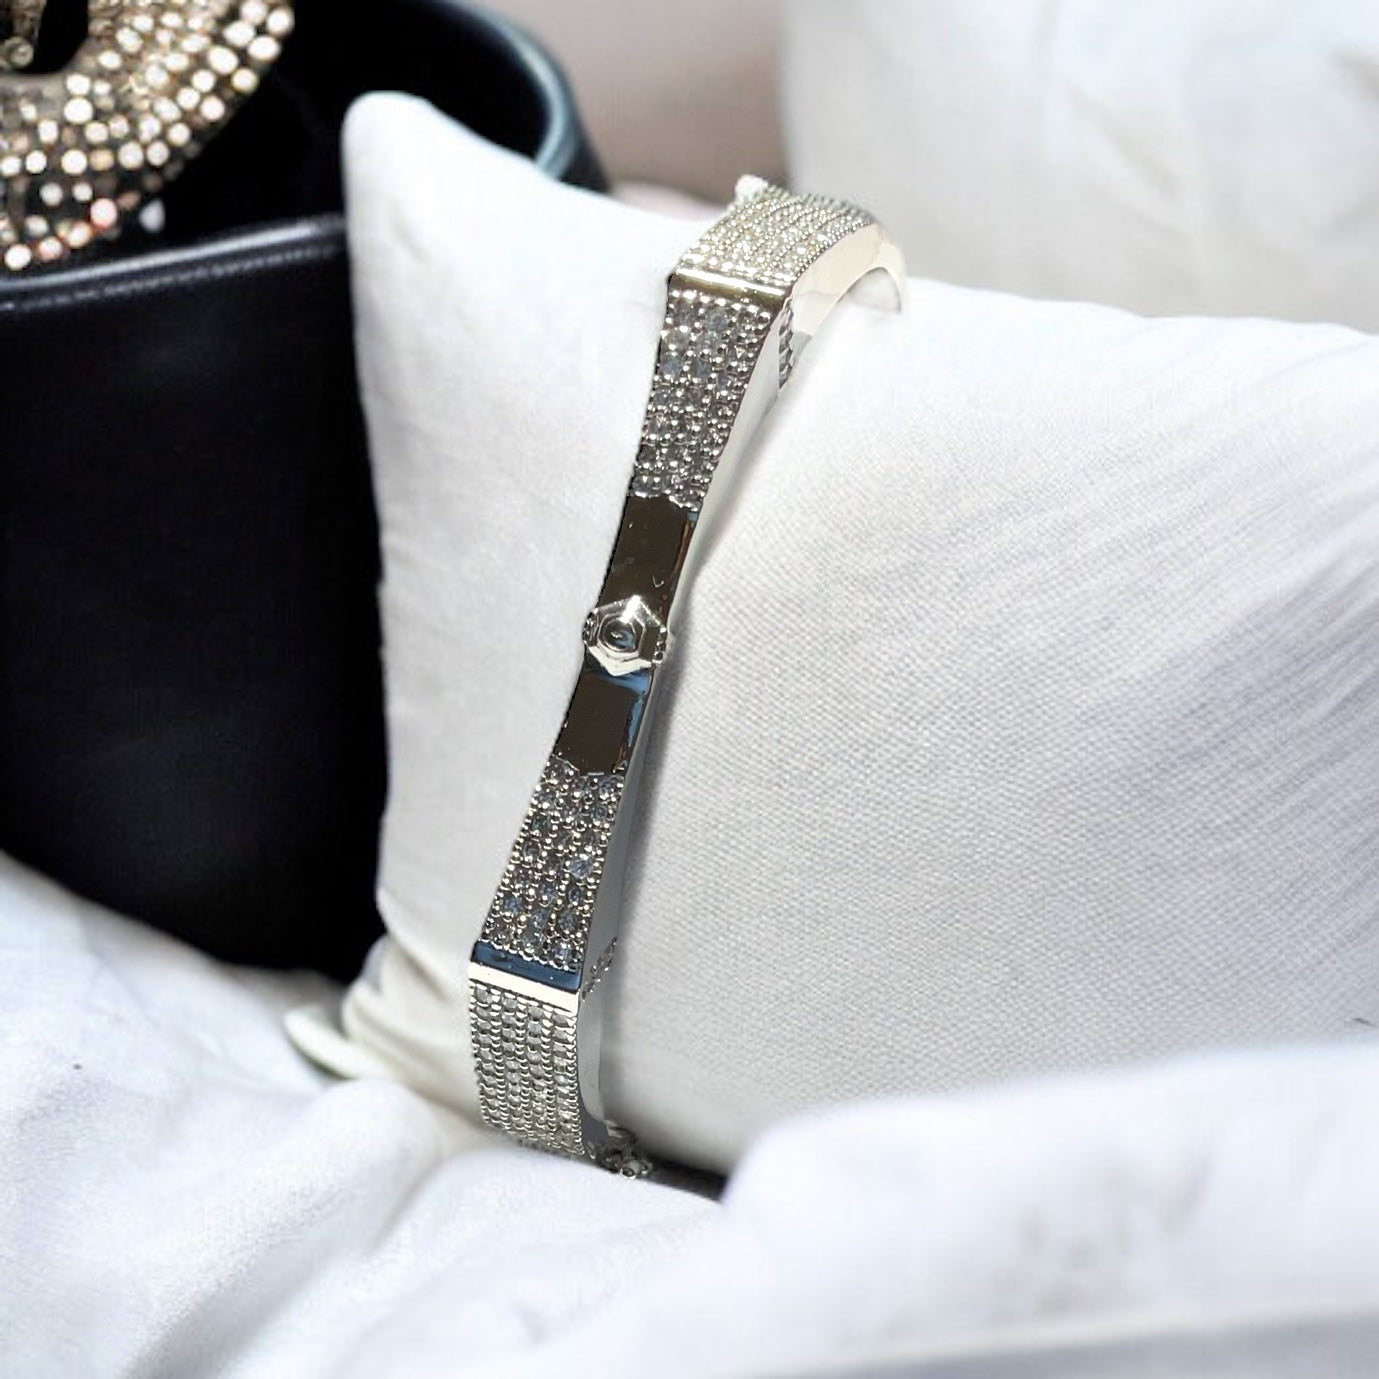 a watch sitting on a pillow next to a purse